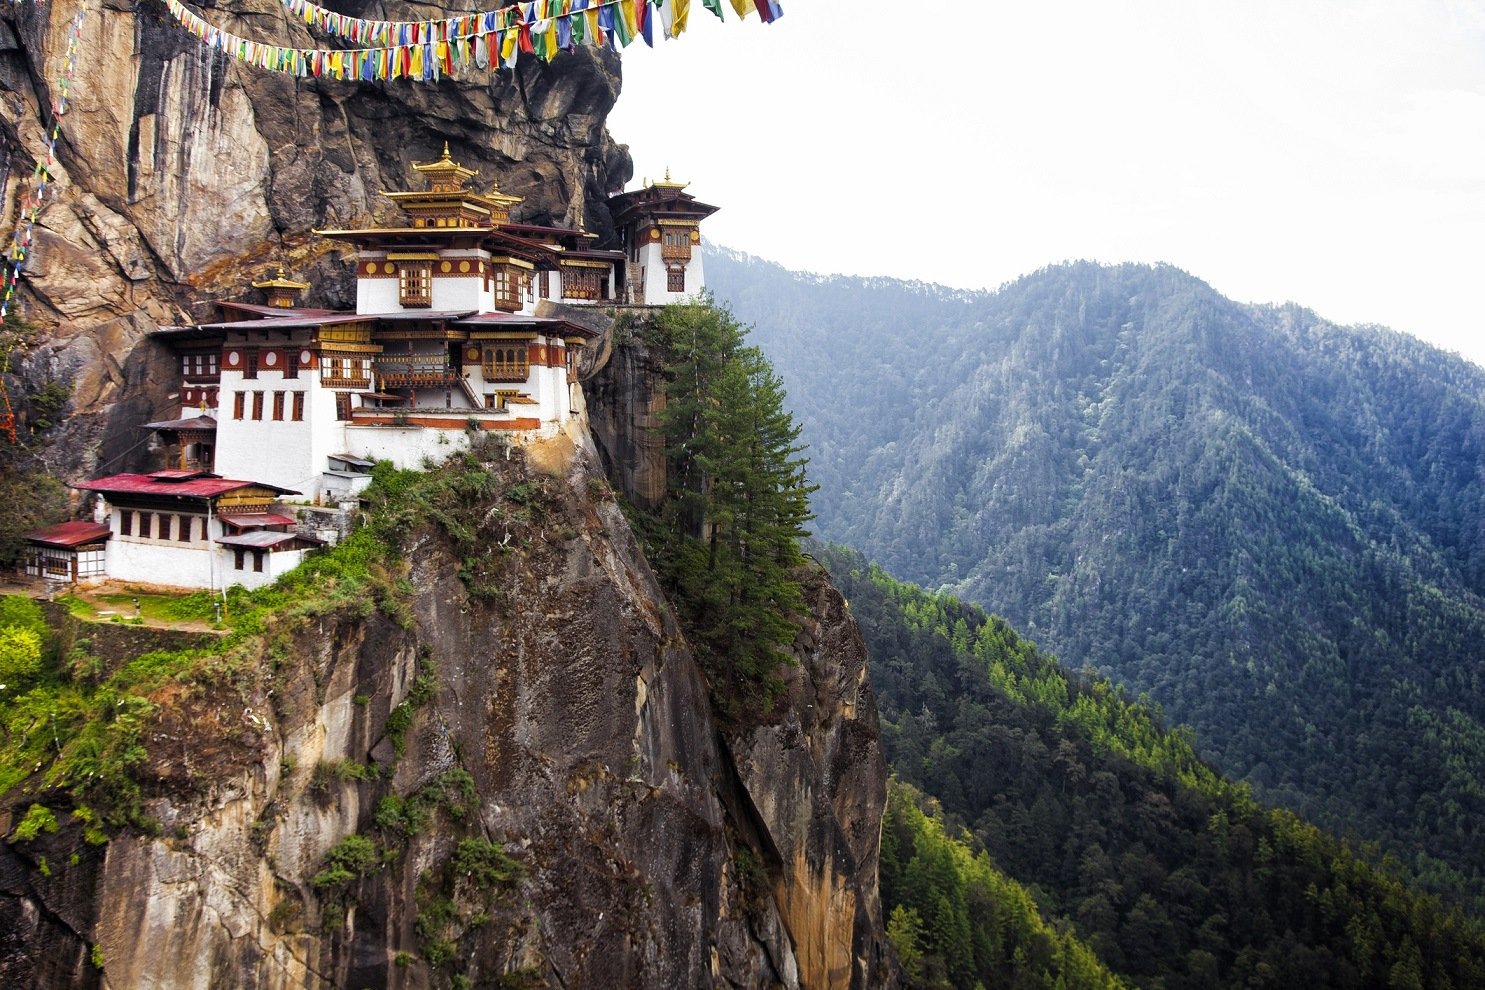 Buddhist temple located on the side of a cliff in Bhutan